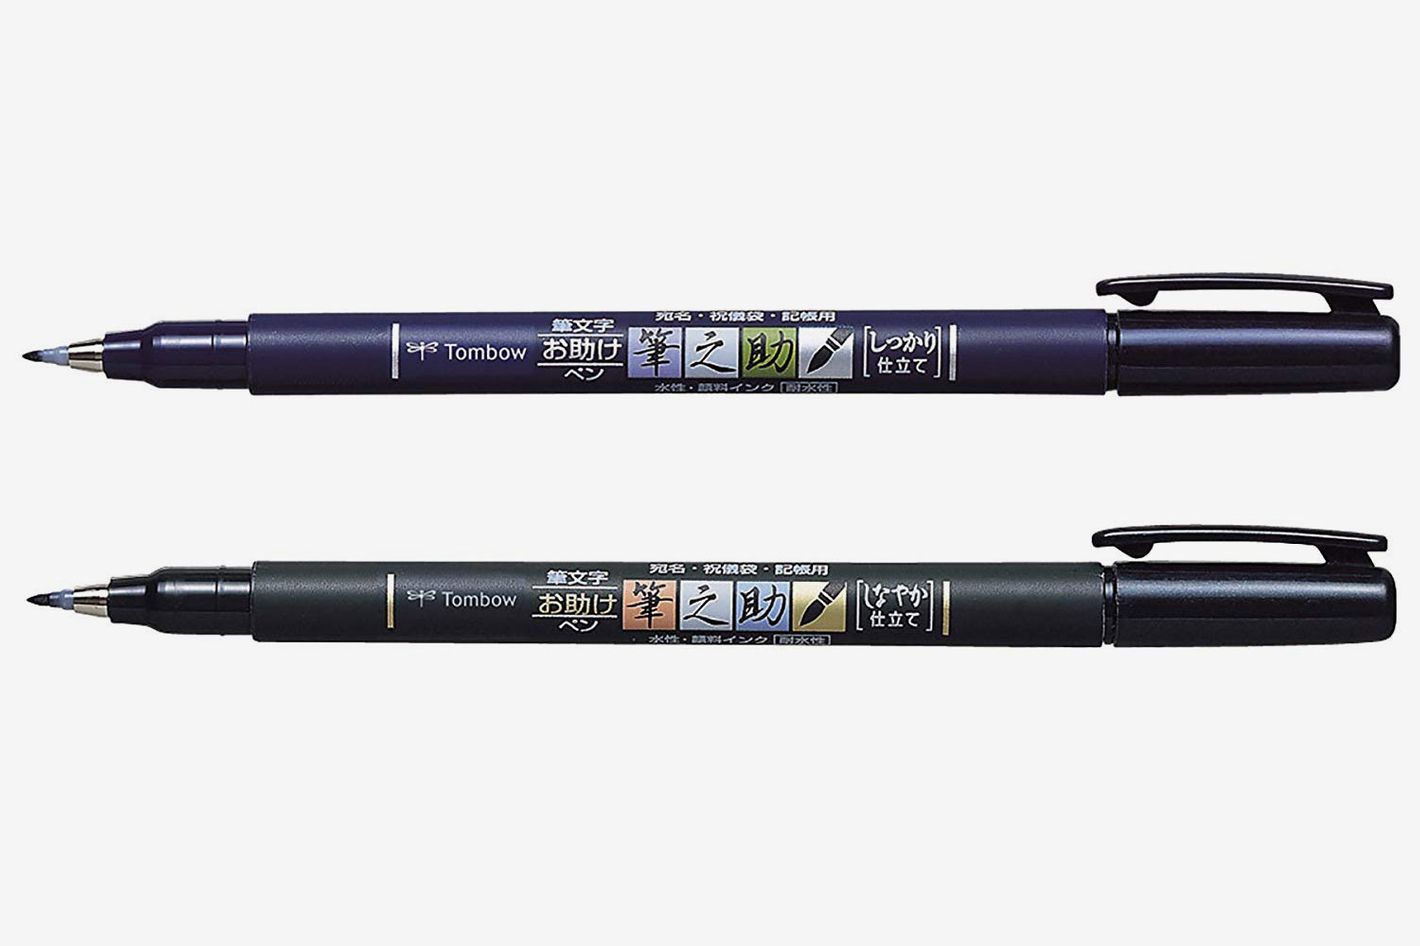 best pens for note taking